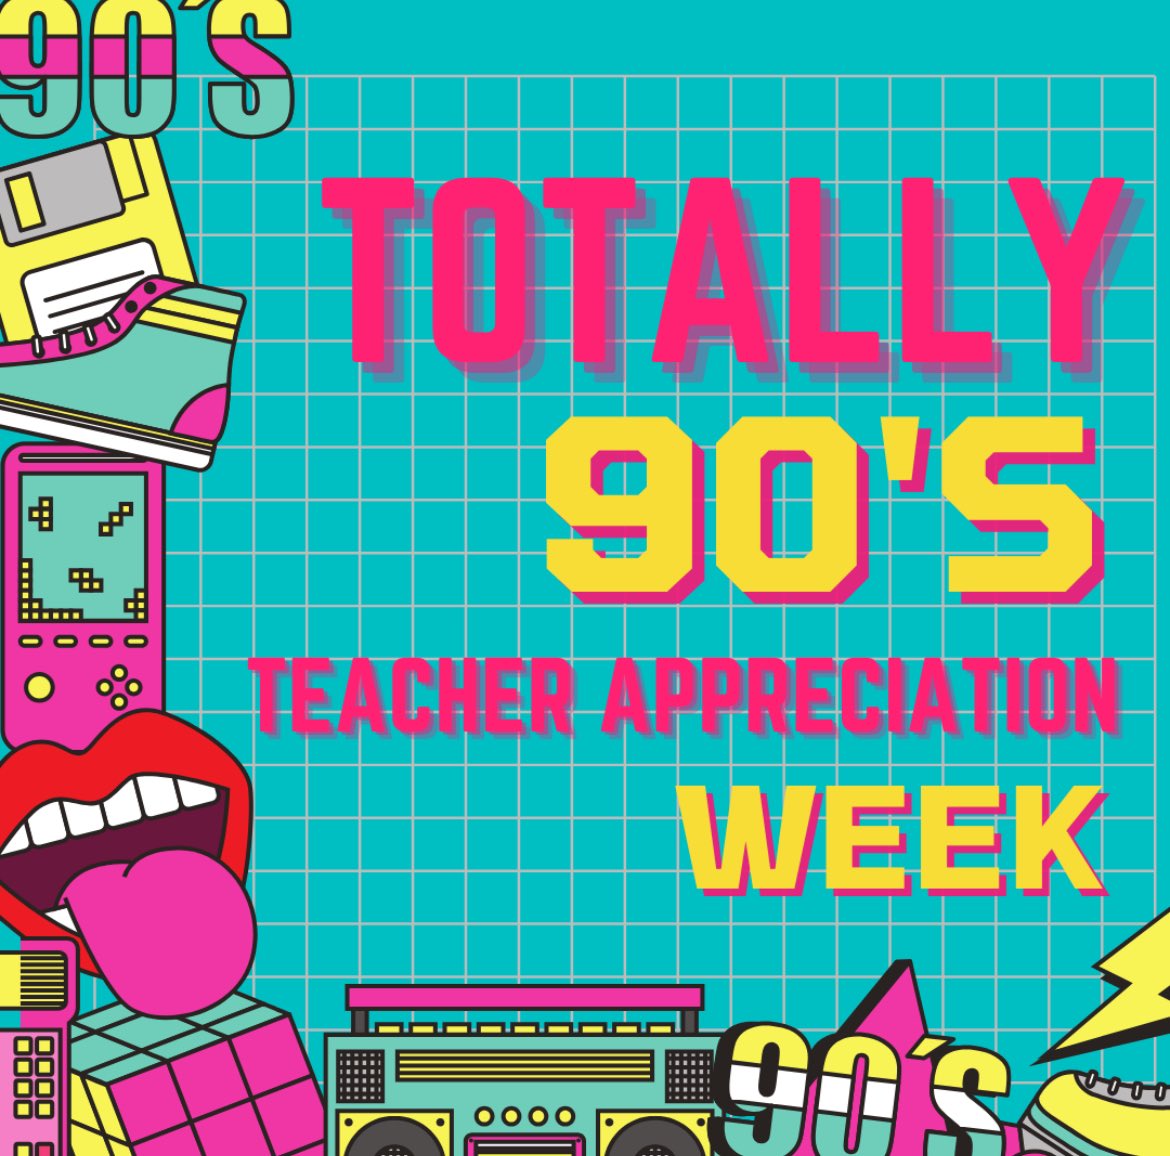 We can’t wait to have a Totally 90s #TeacherAppreciationWeek at West next week! 

We are so grateful for all our staff! #theWestWay @theSMSD @thesmsdhr

Image credit to B. Morrissey @sm_westwatch